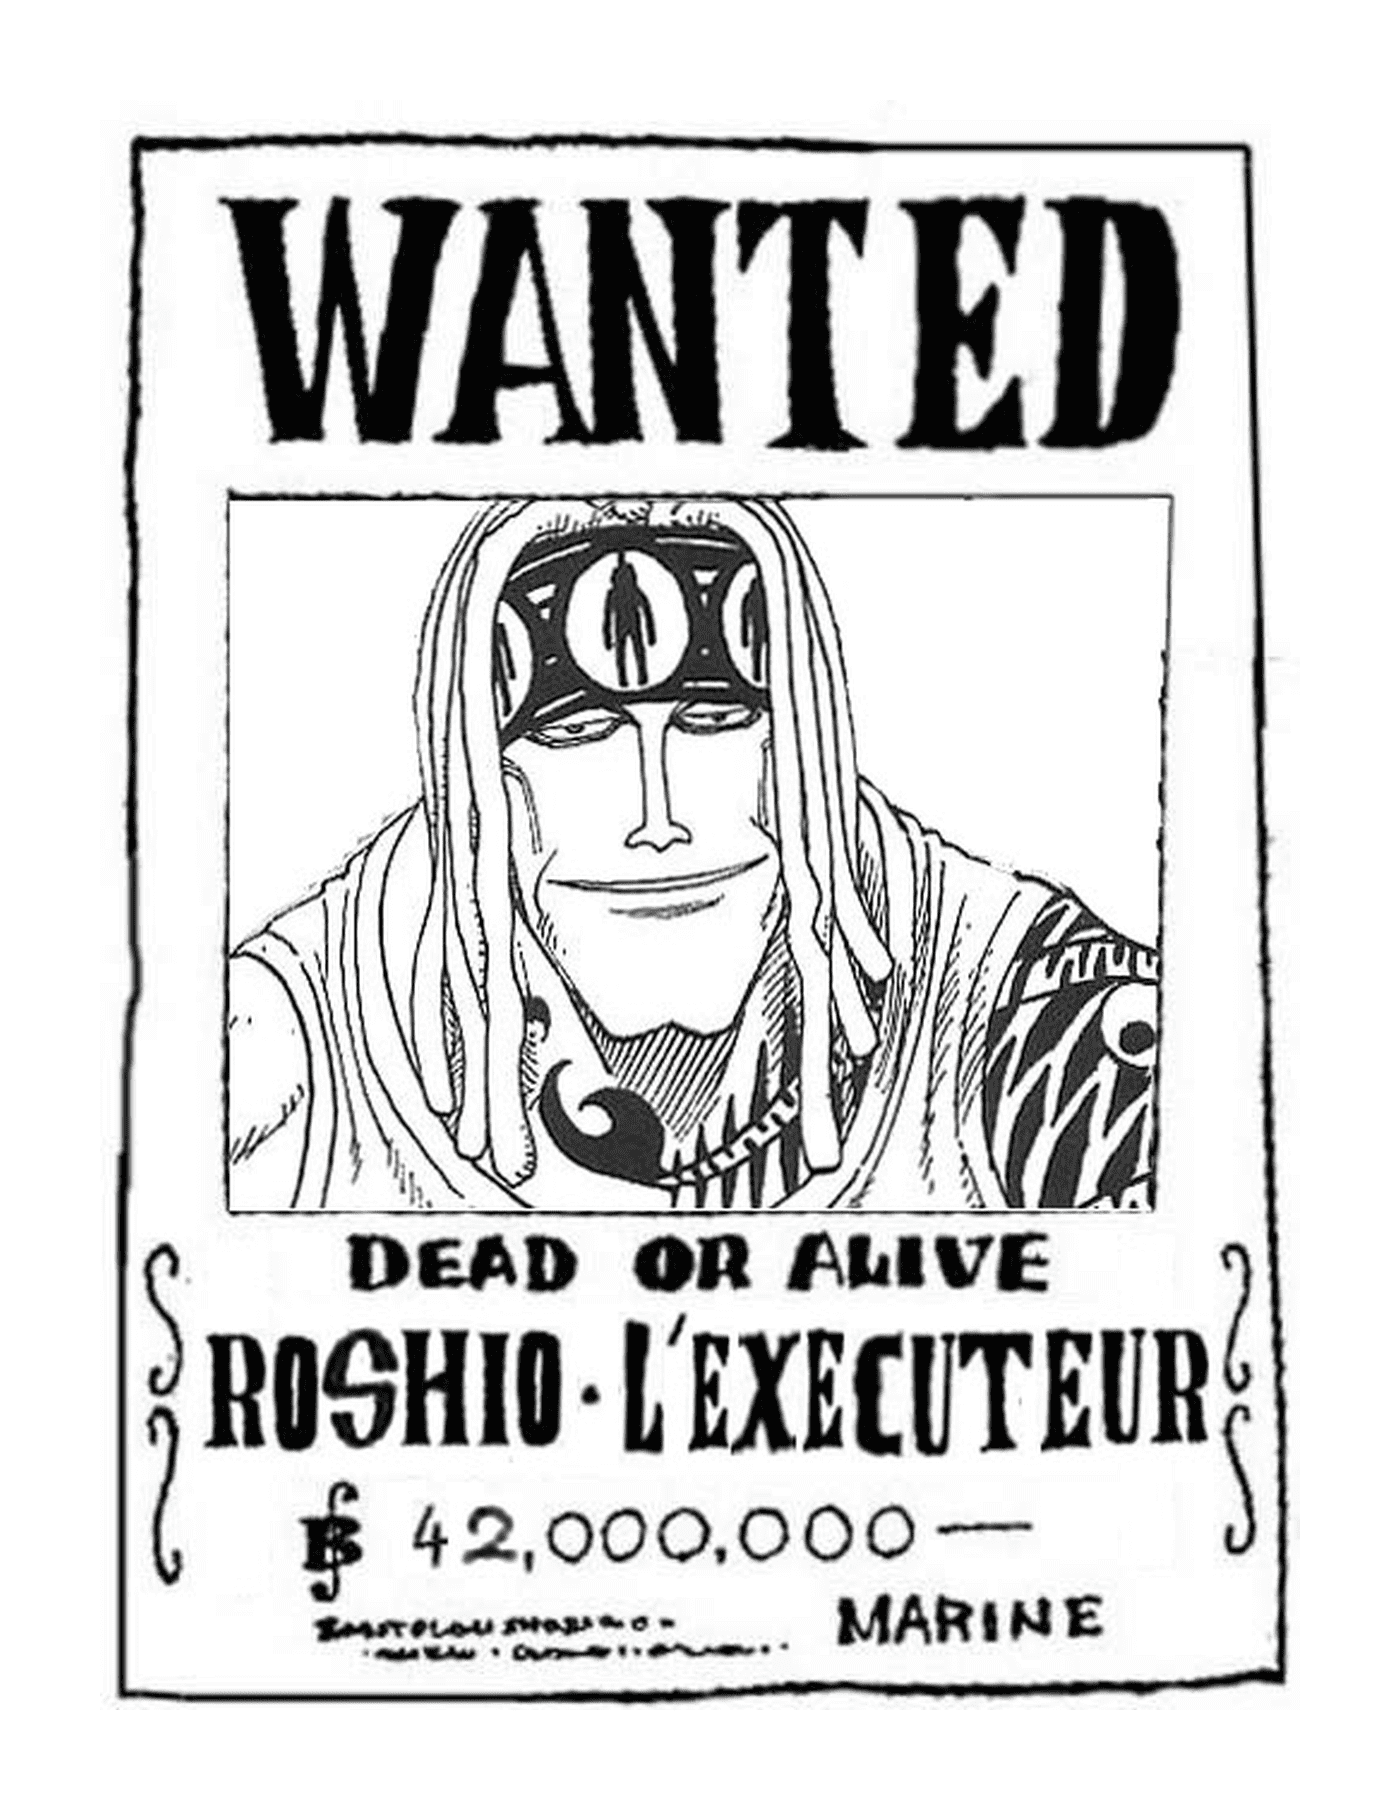  Wanted Roshio the executor, dead or alive 